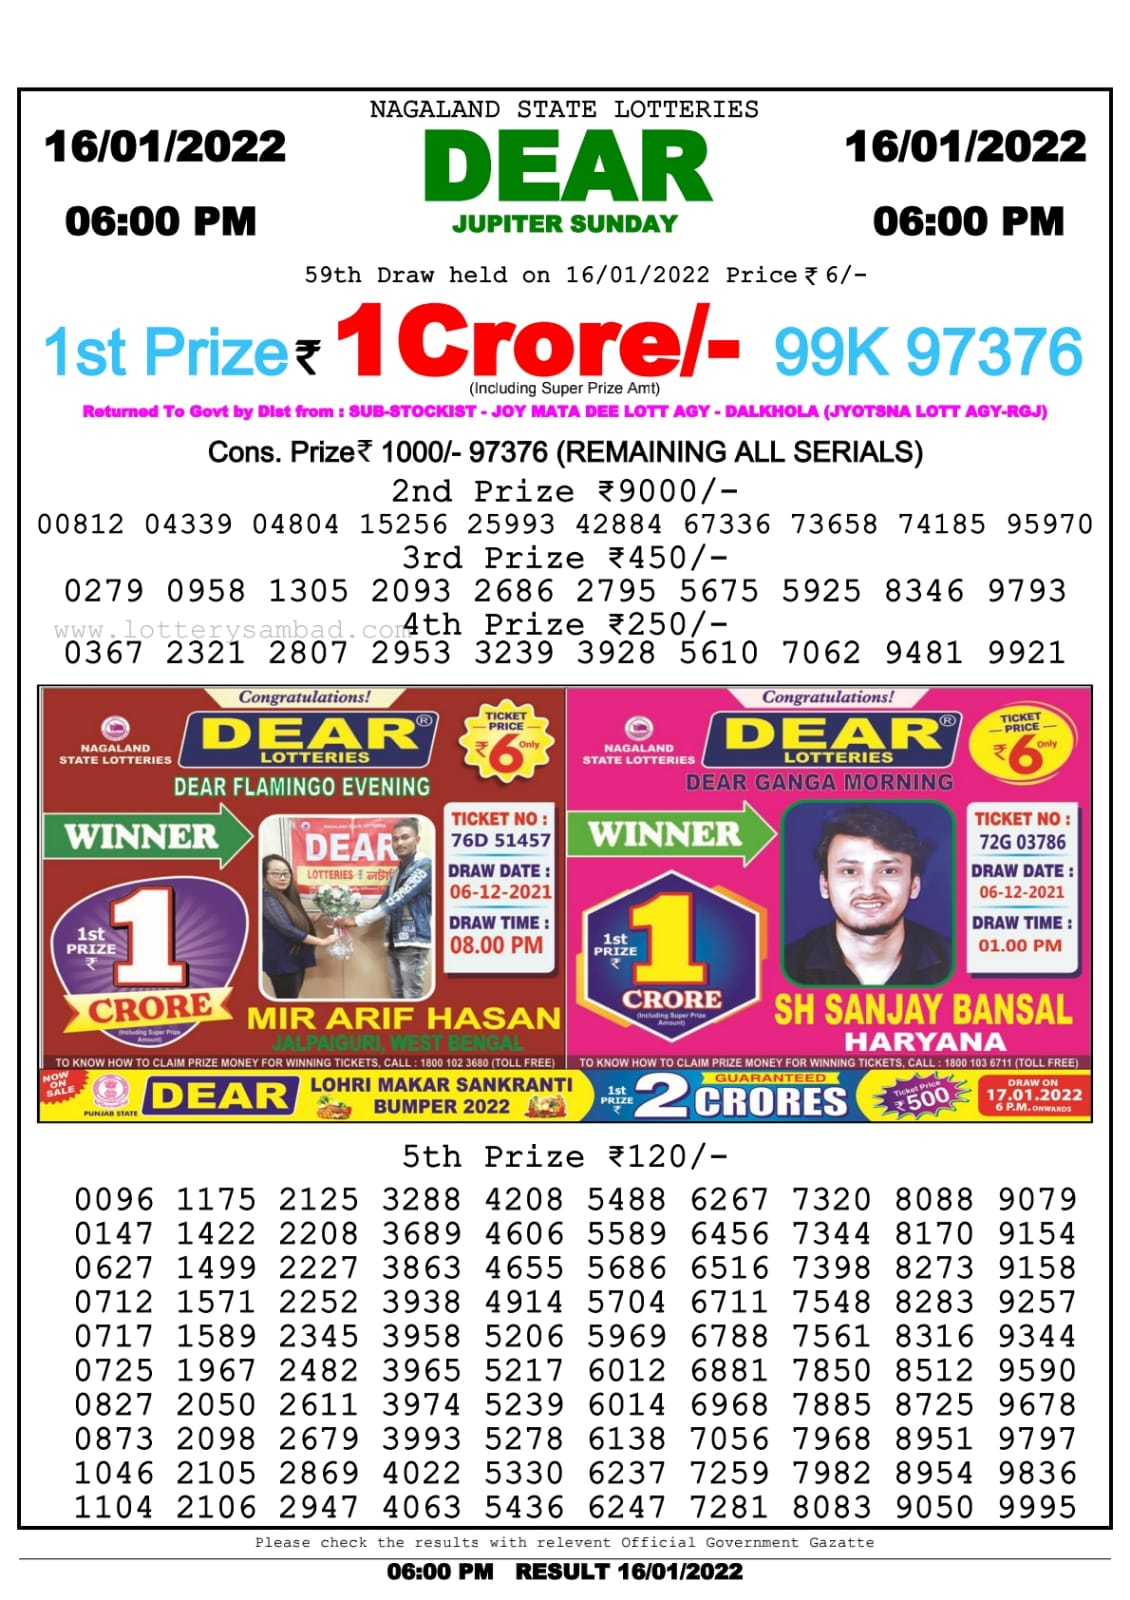 Dear Lottery Nagaland state Lottery Results 6.00 PM 16/01/2022